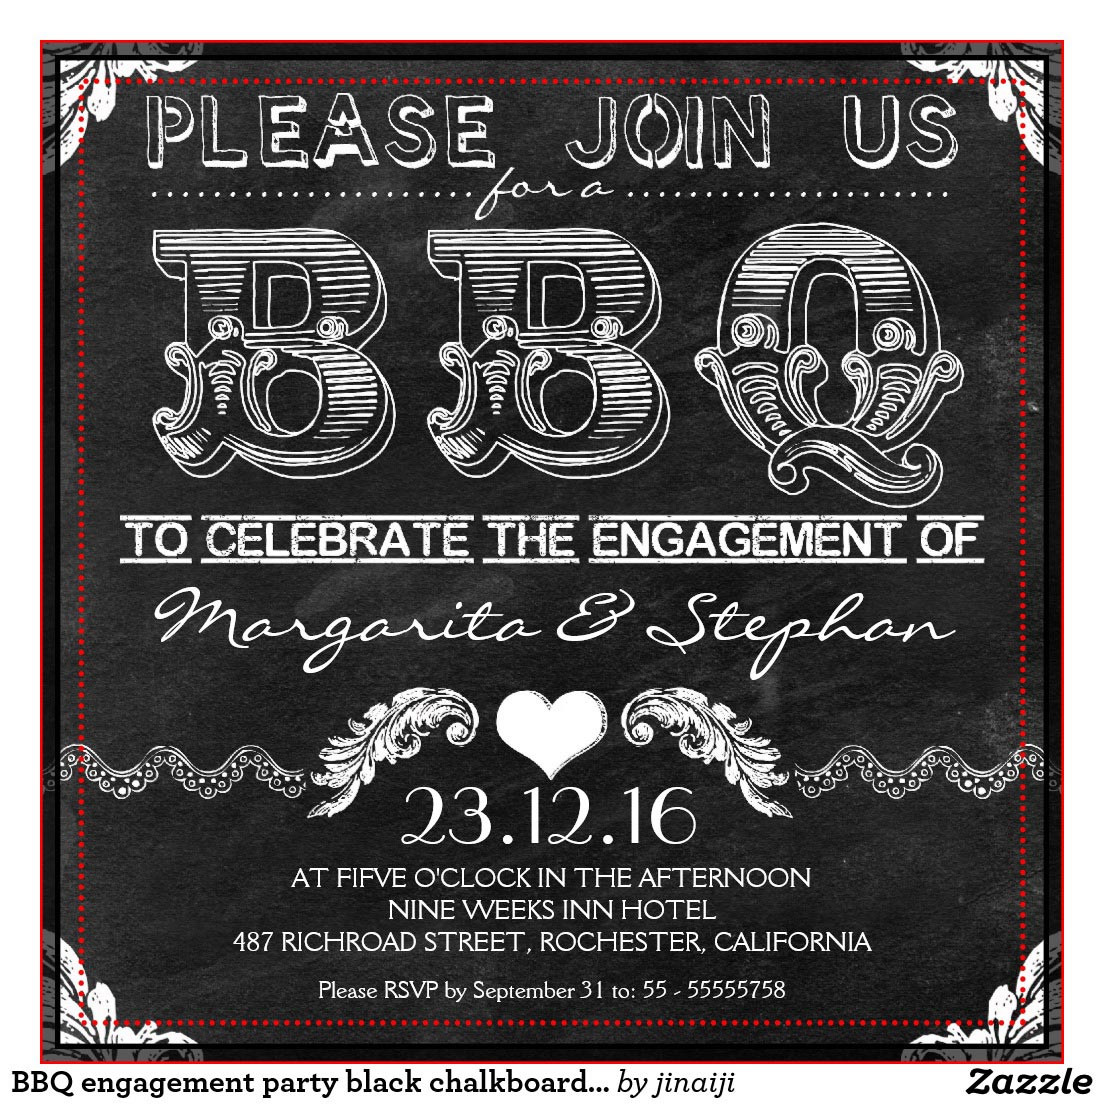 Engagement Party Invites Ideas
 I Do BBQ Engagement Party Invitations